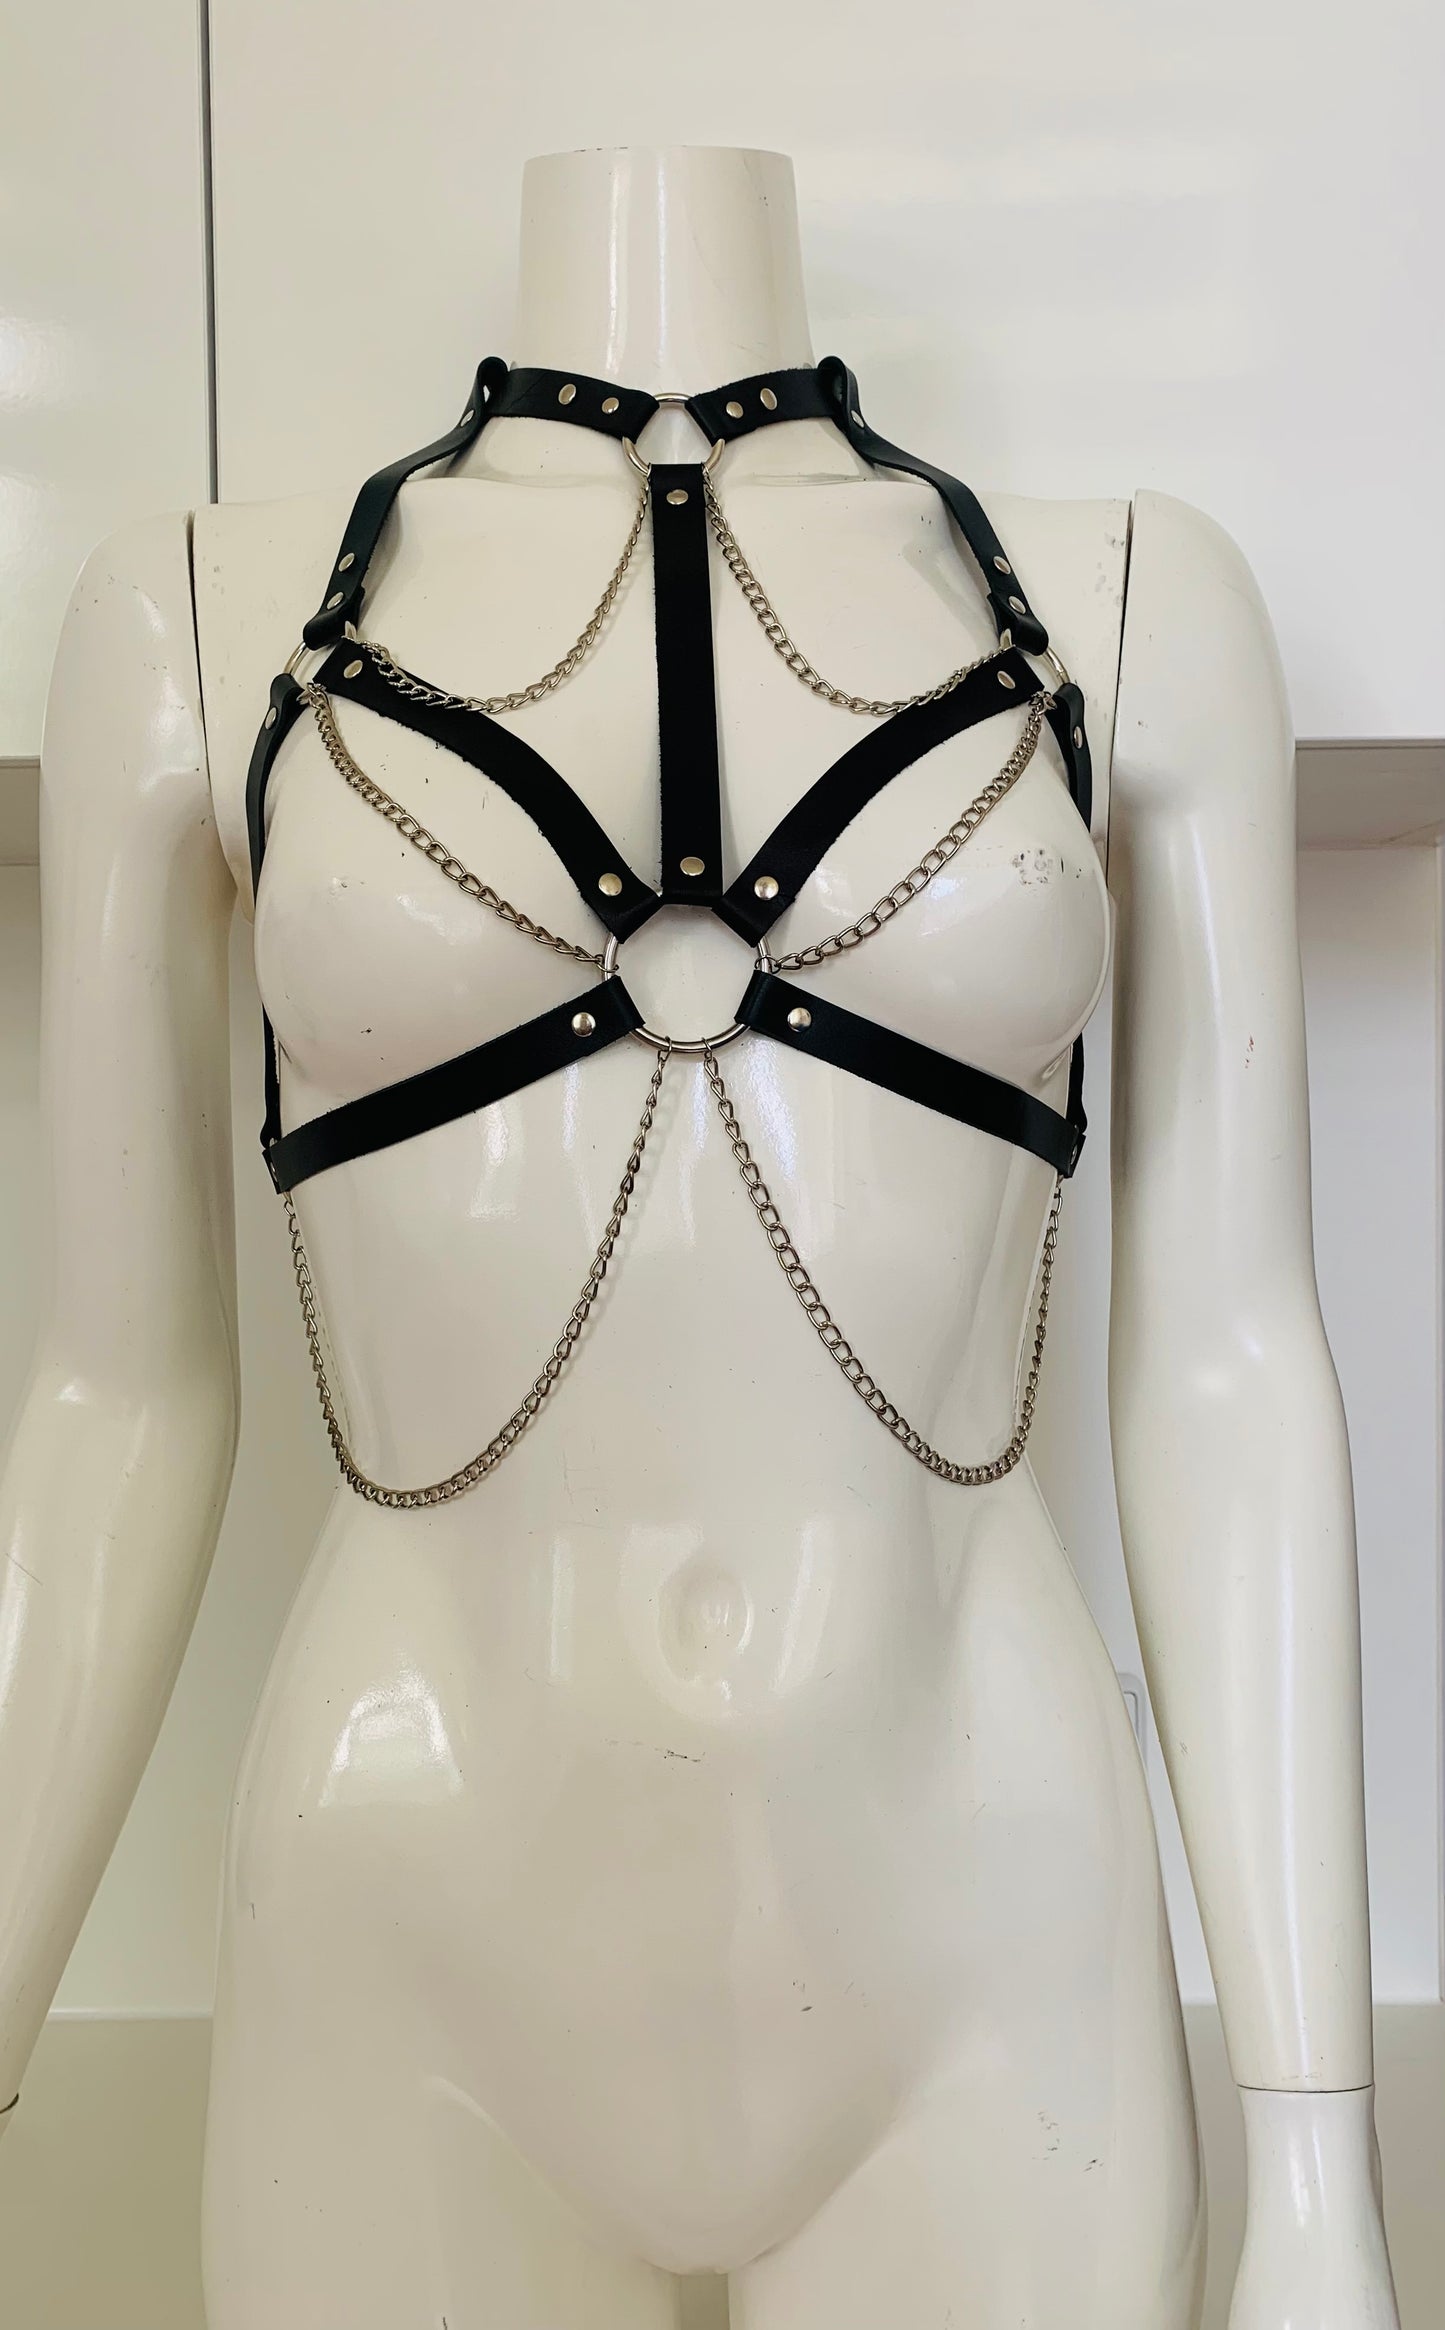 Die Welle Leather Harness